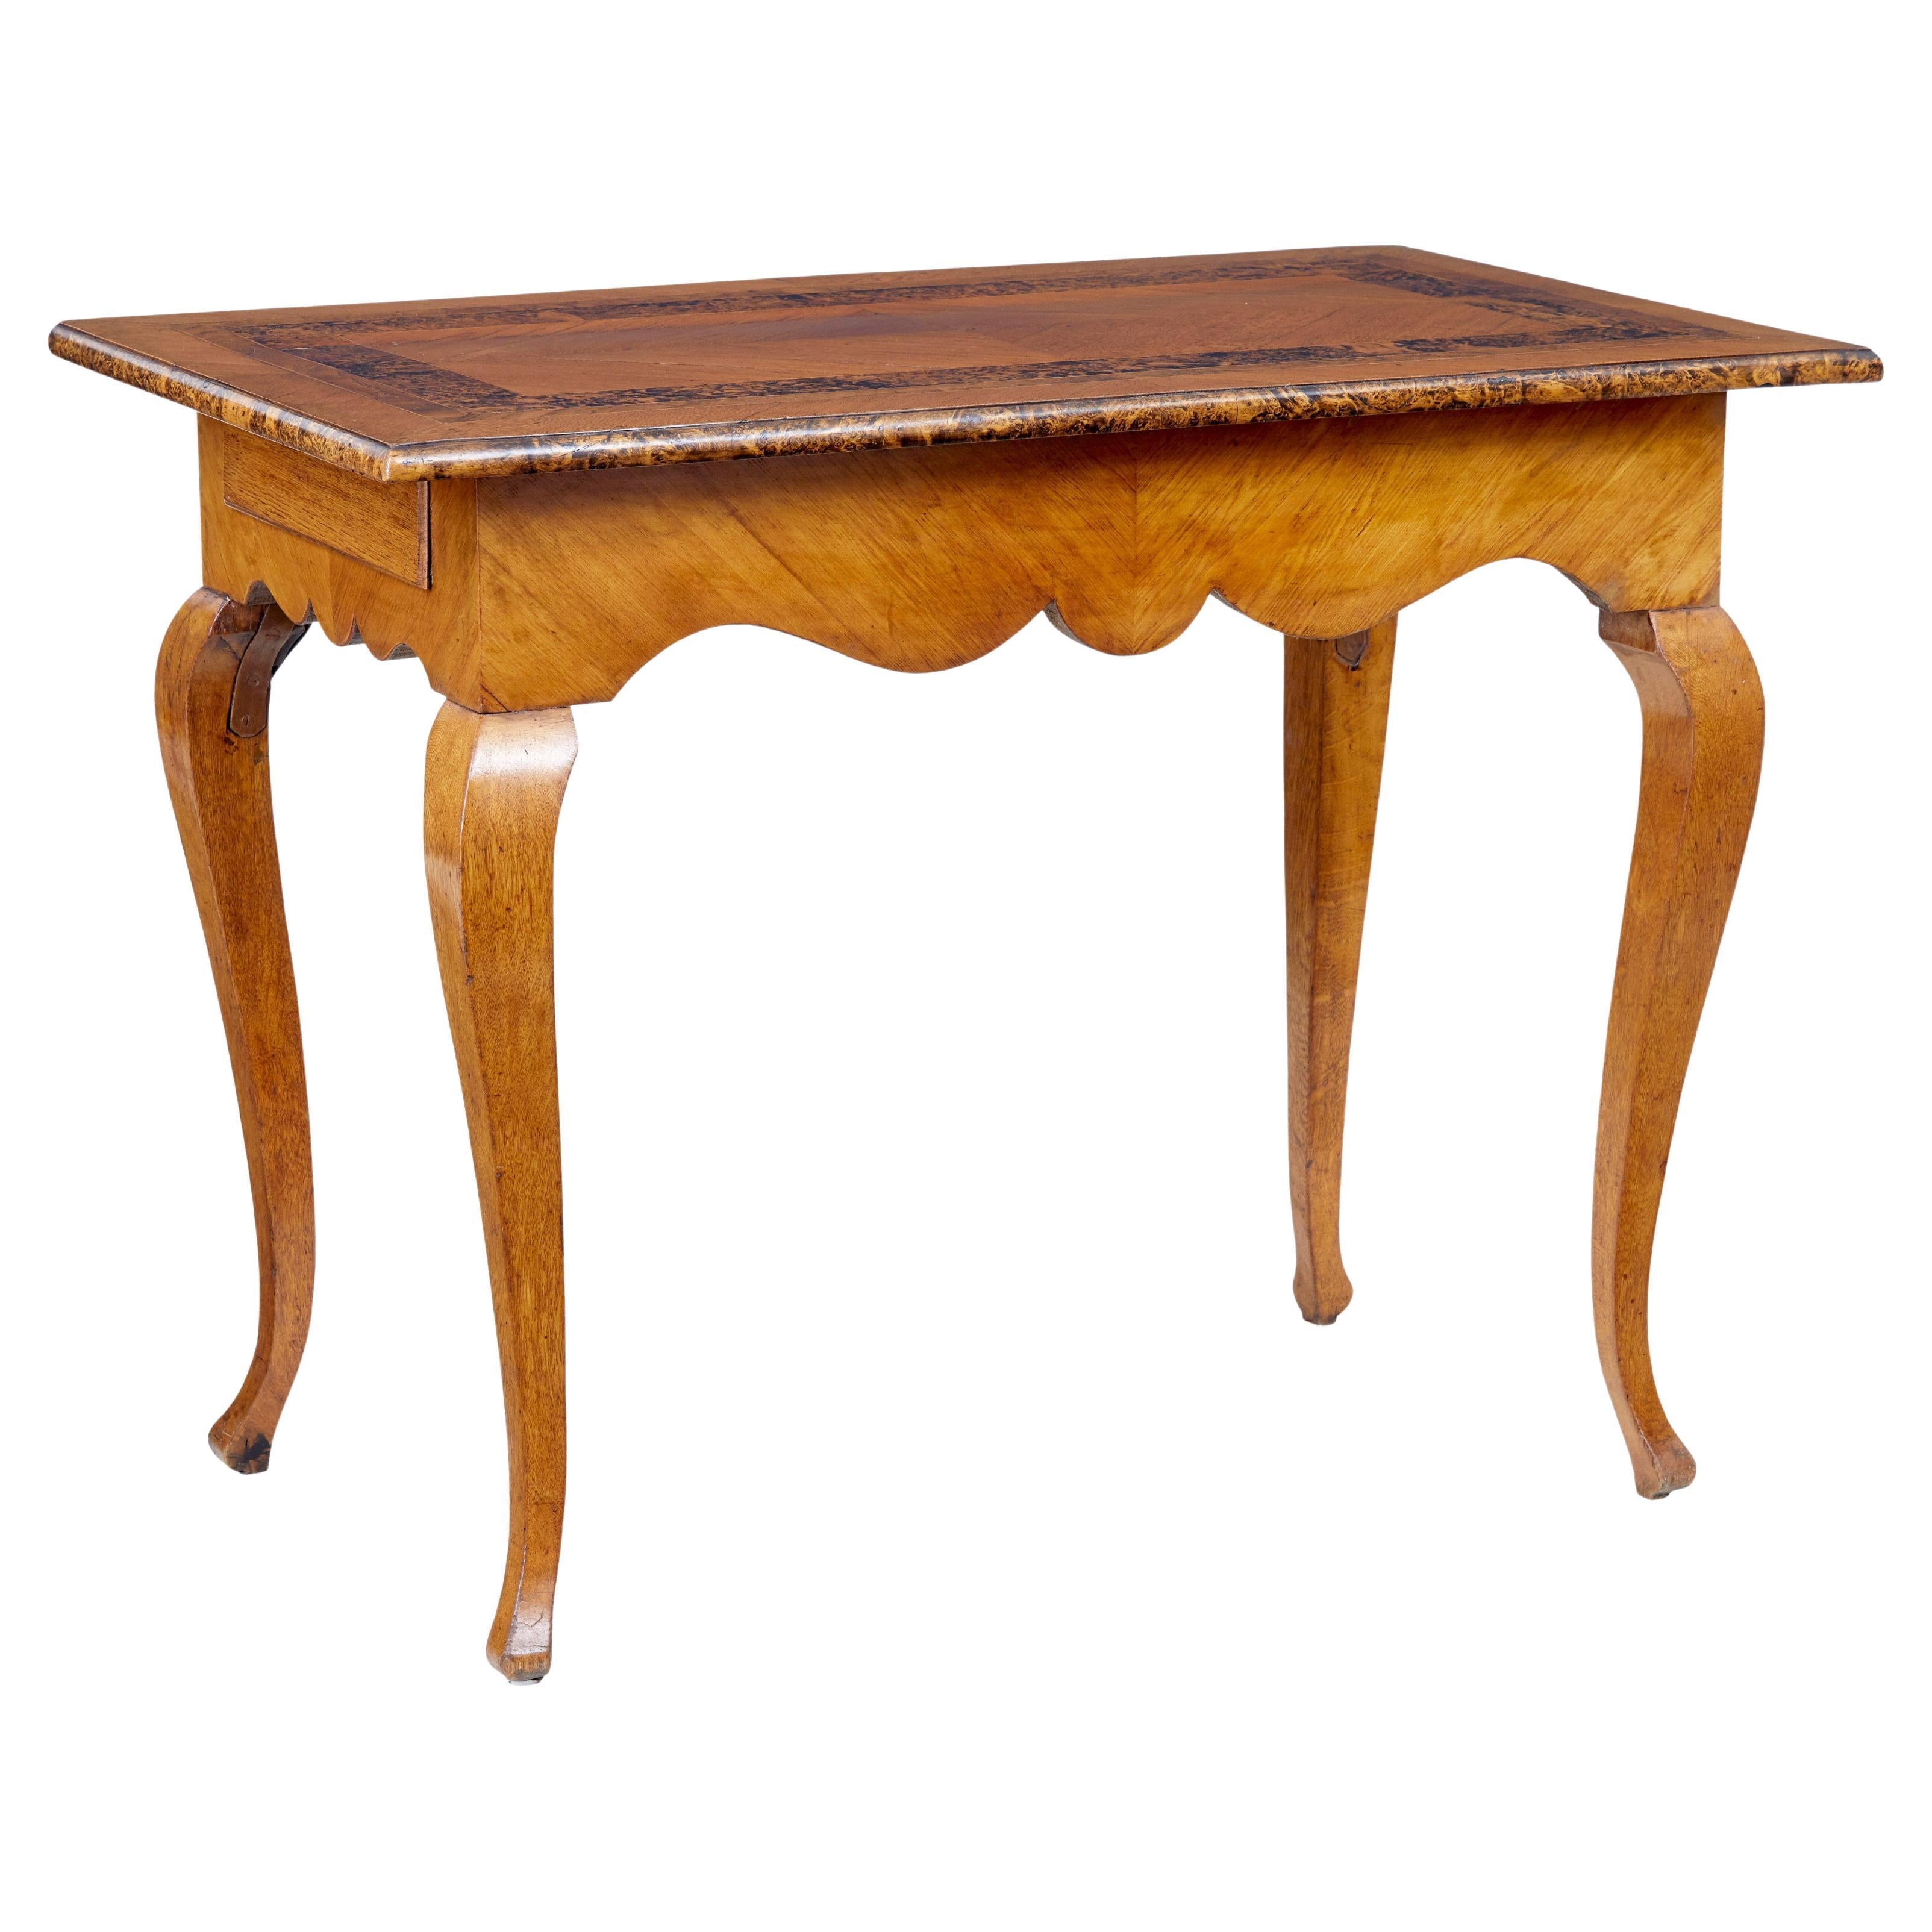 Swedish Mid-19th Century Alder Root Occasional Table